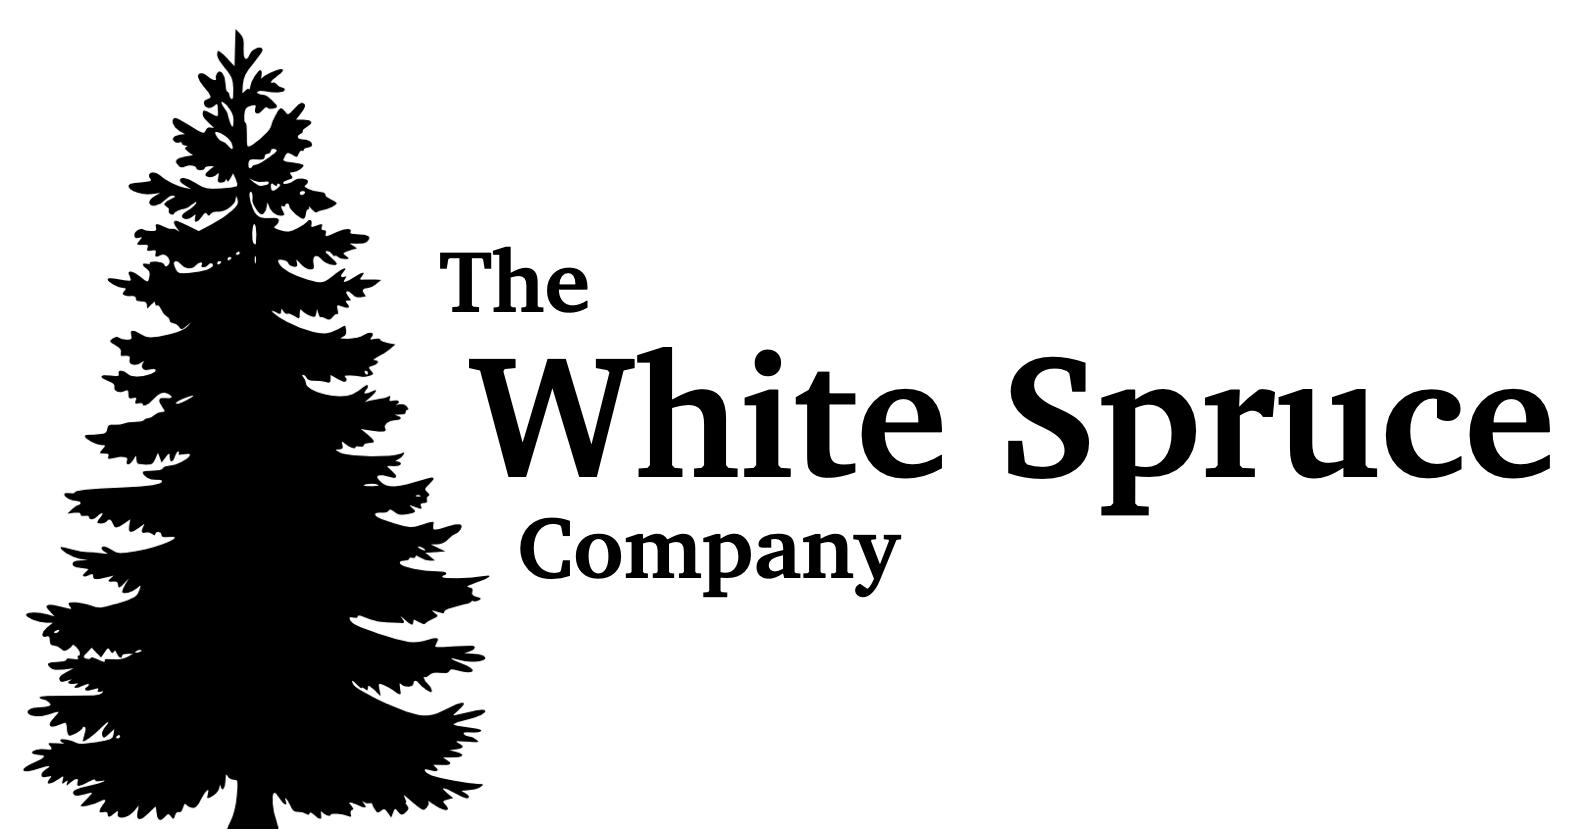 The White Spruce Company